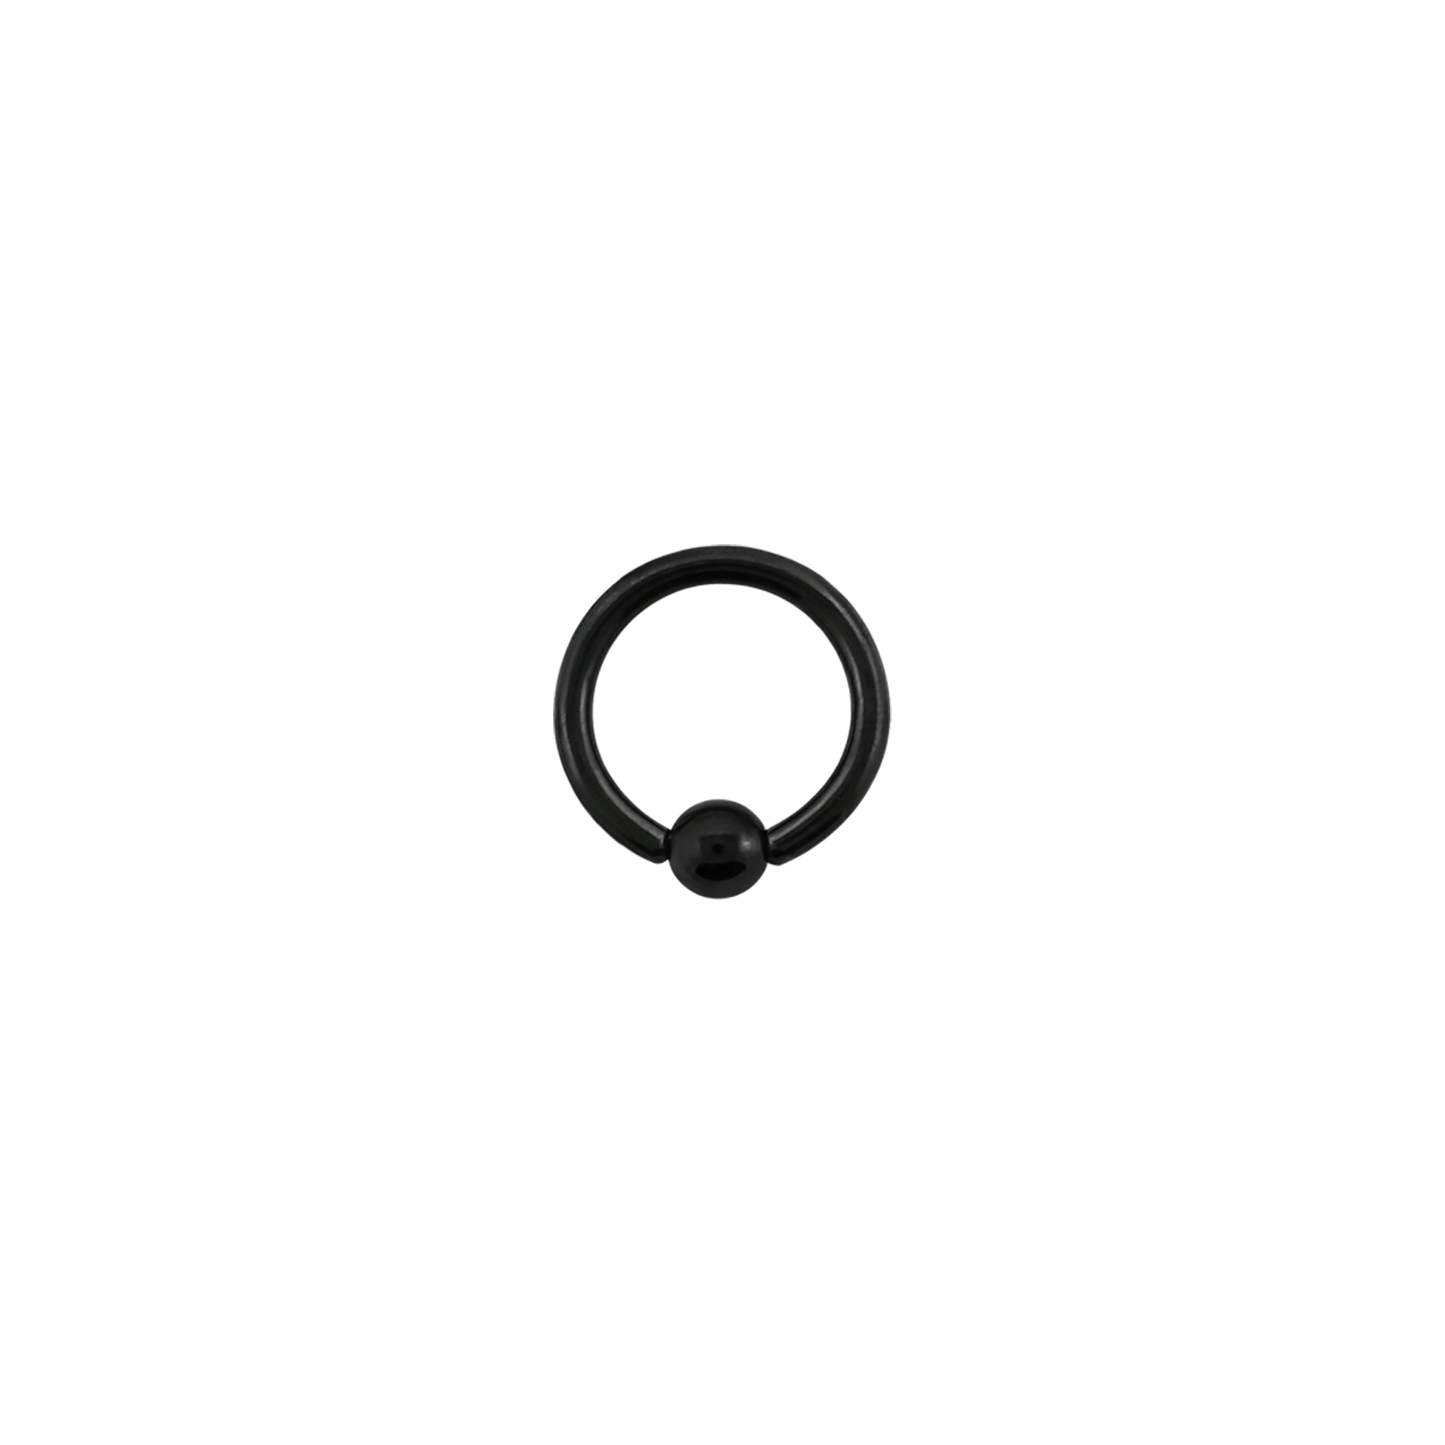 Black 16g Surgical Steel BCR (Ball Closure Ring)